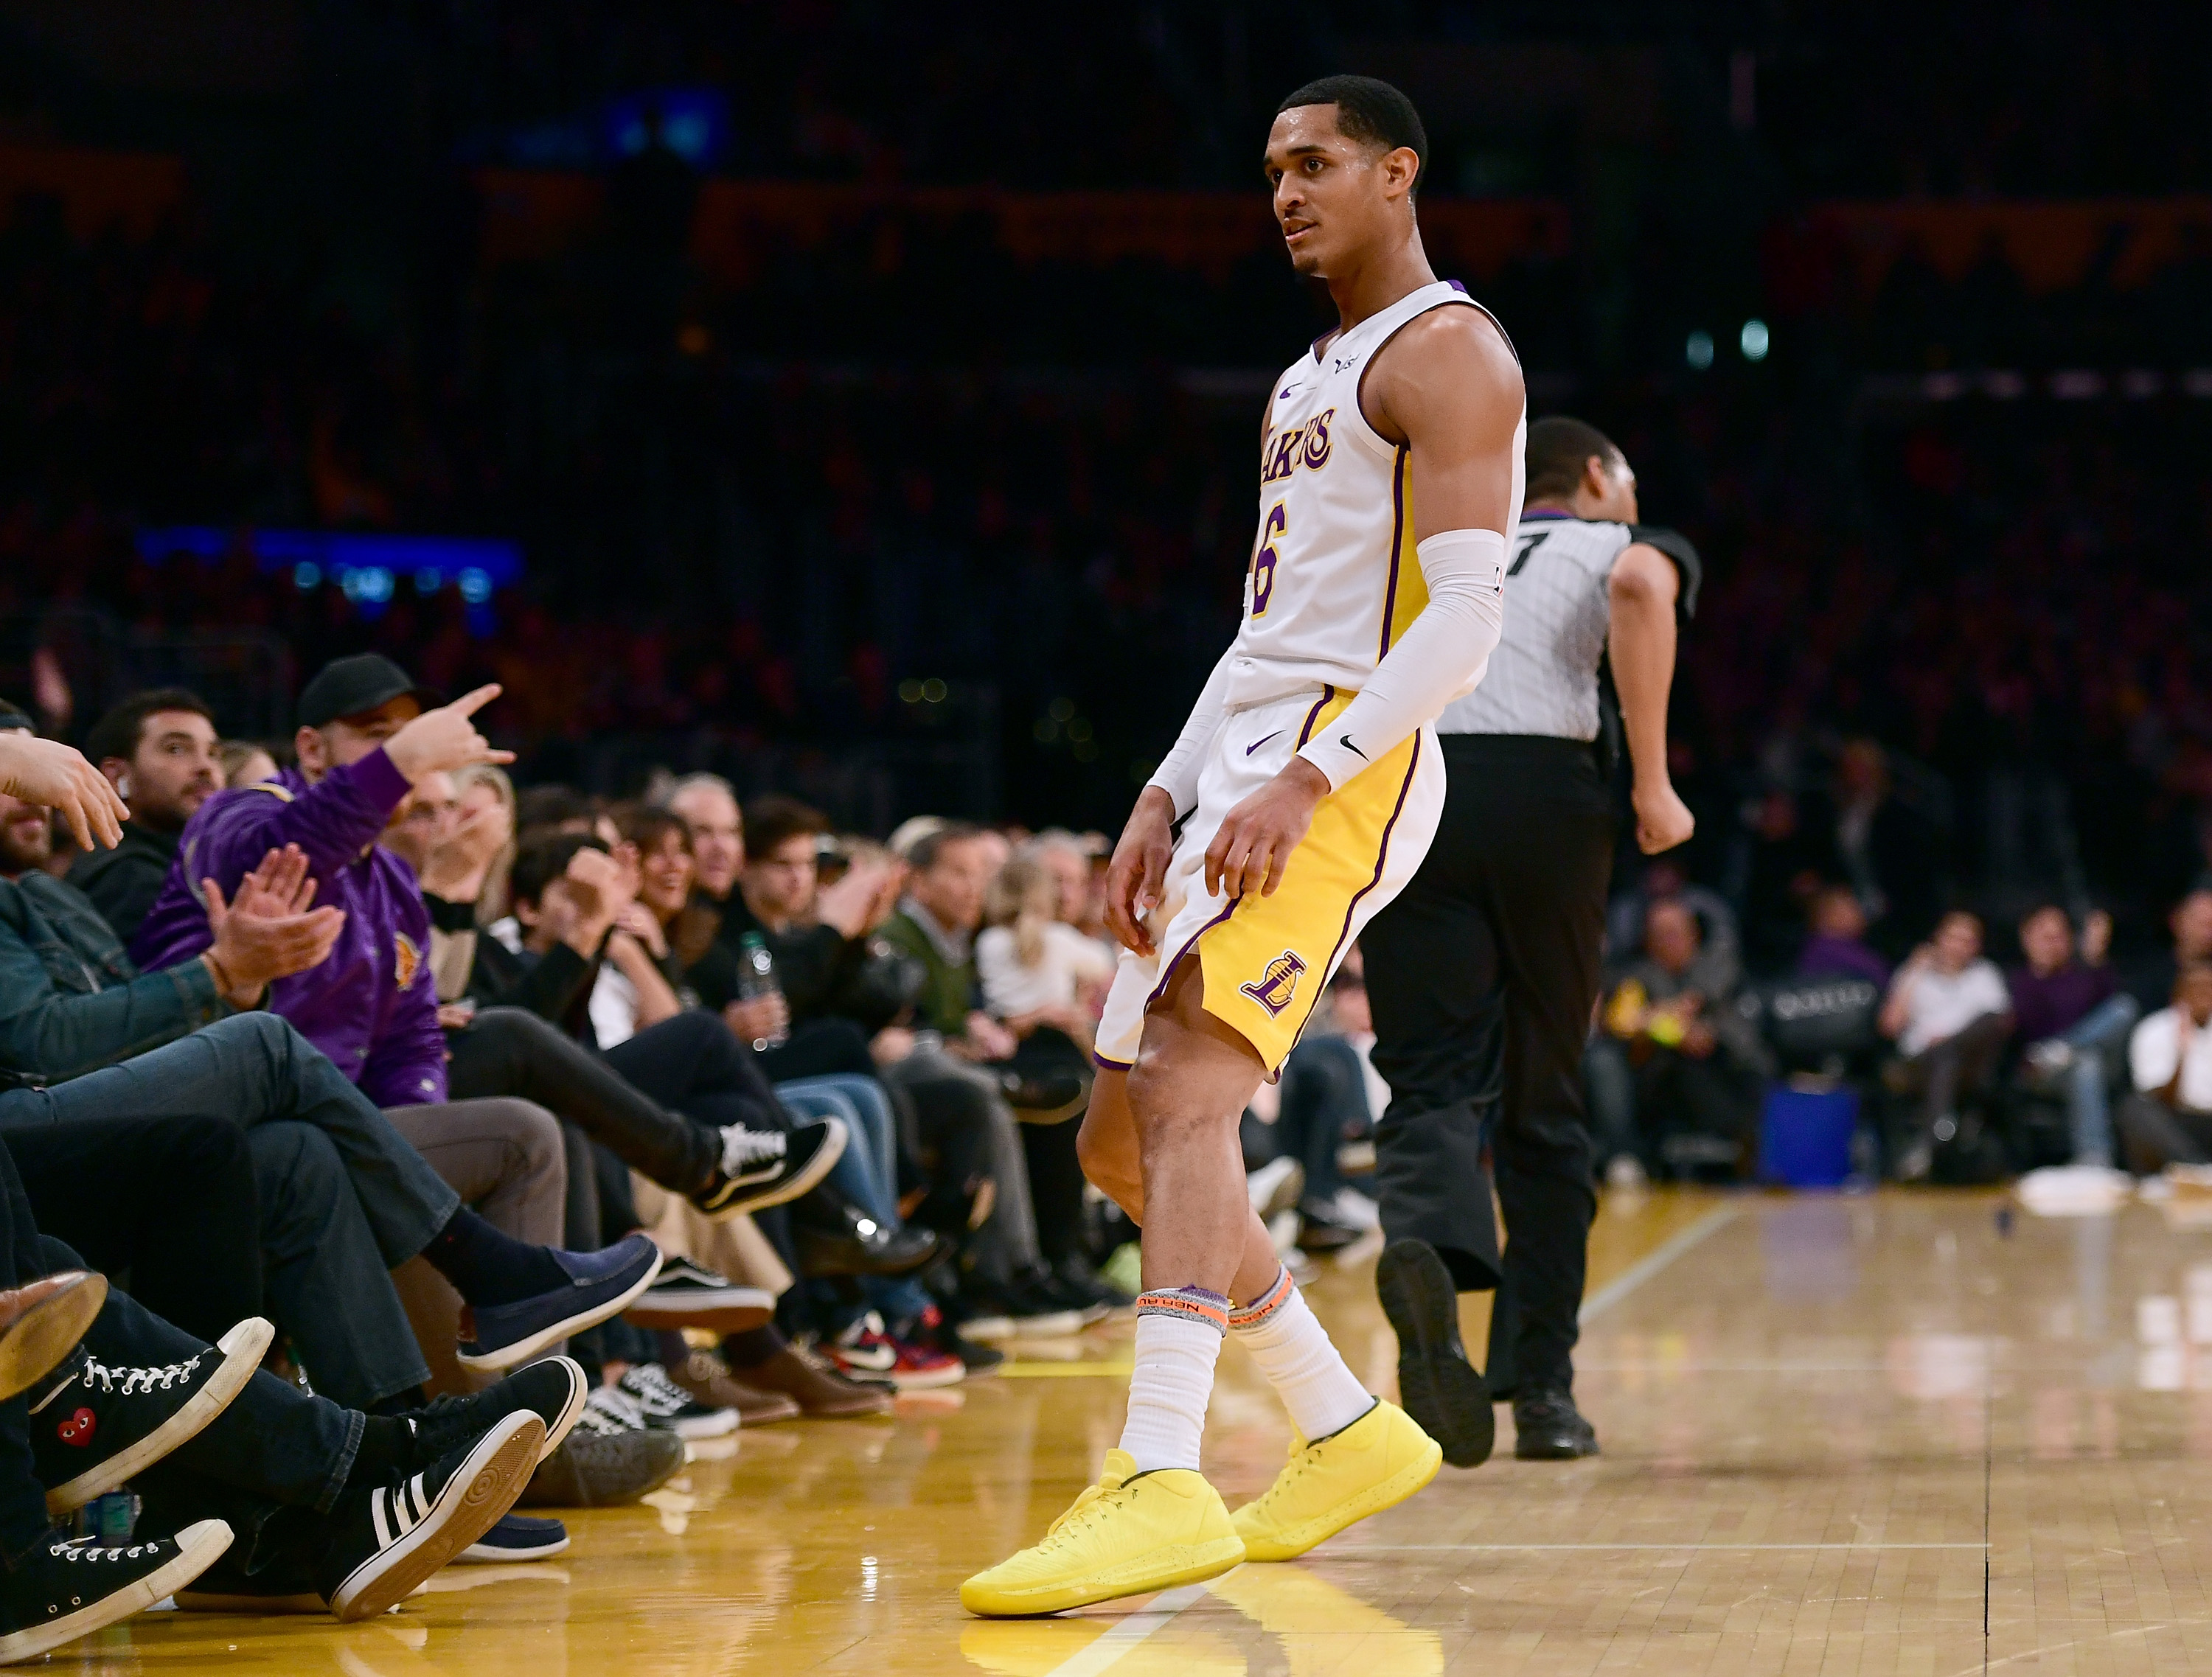 Lakers Rumors: Jordan Clarkson could end up in New York